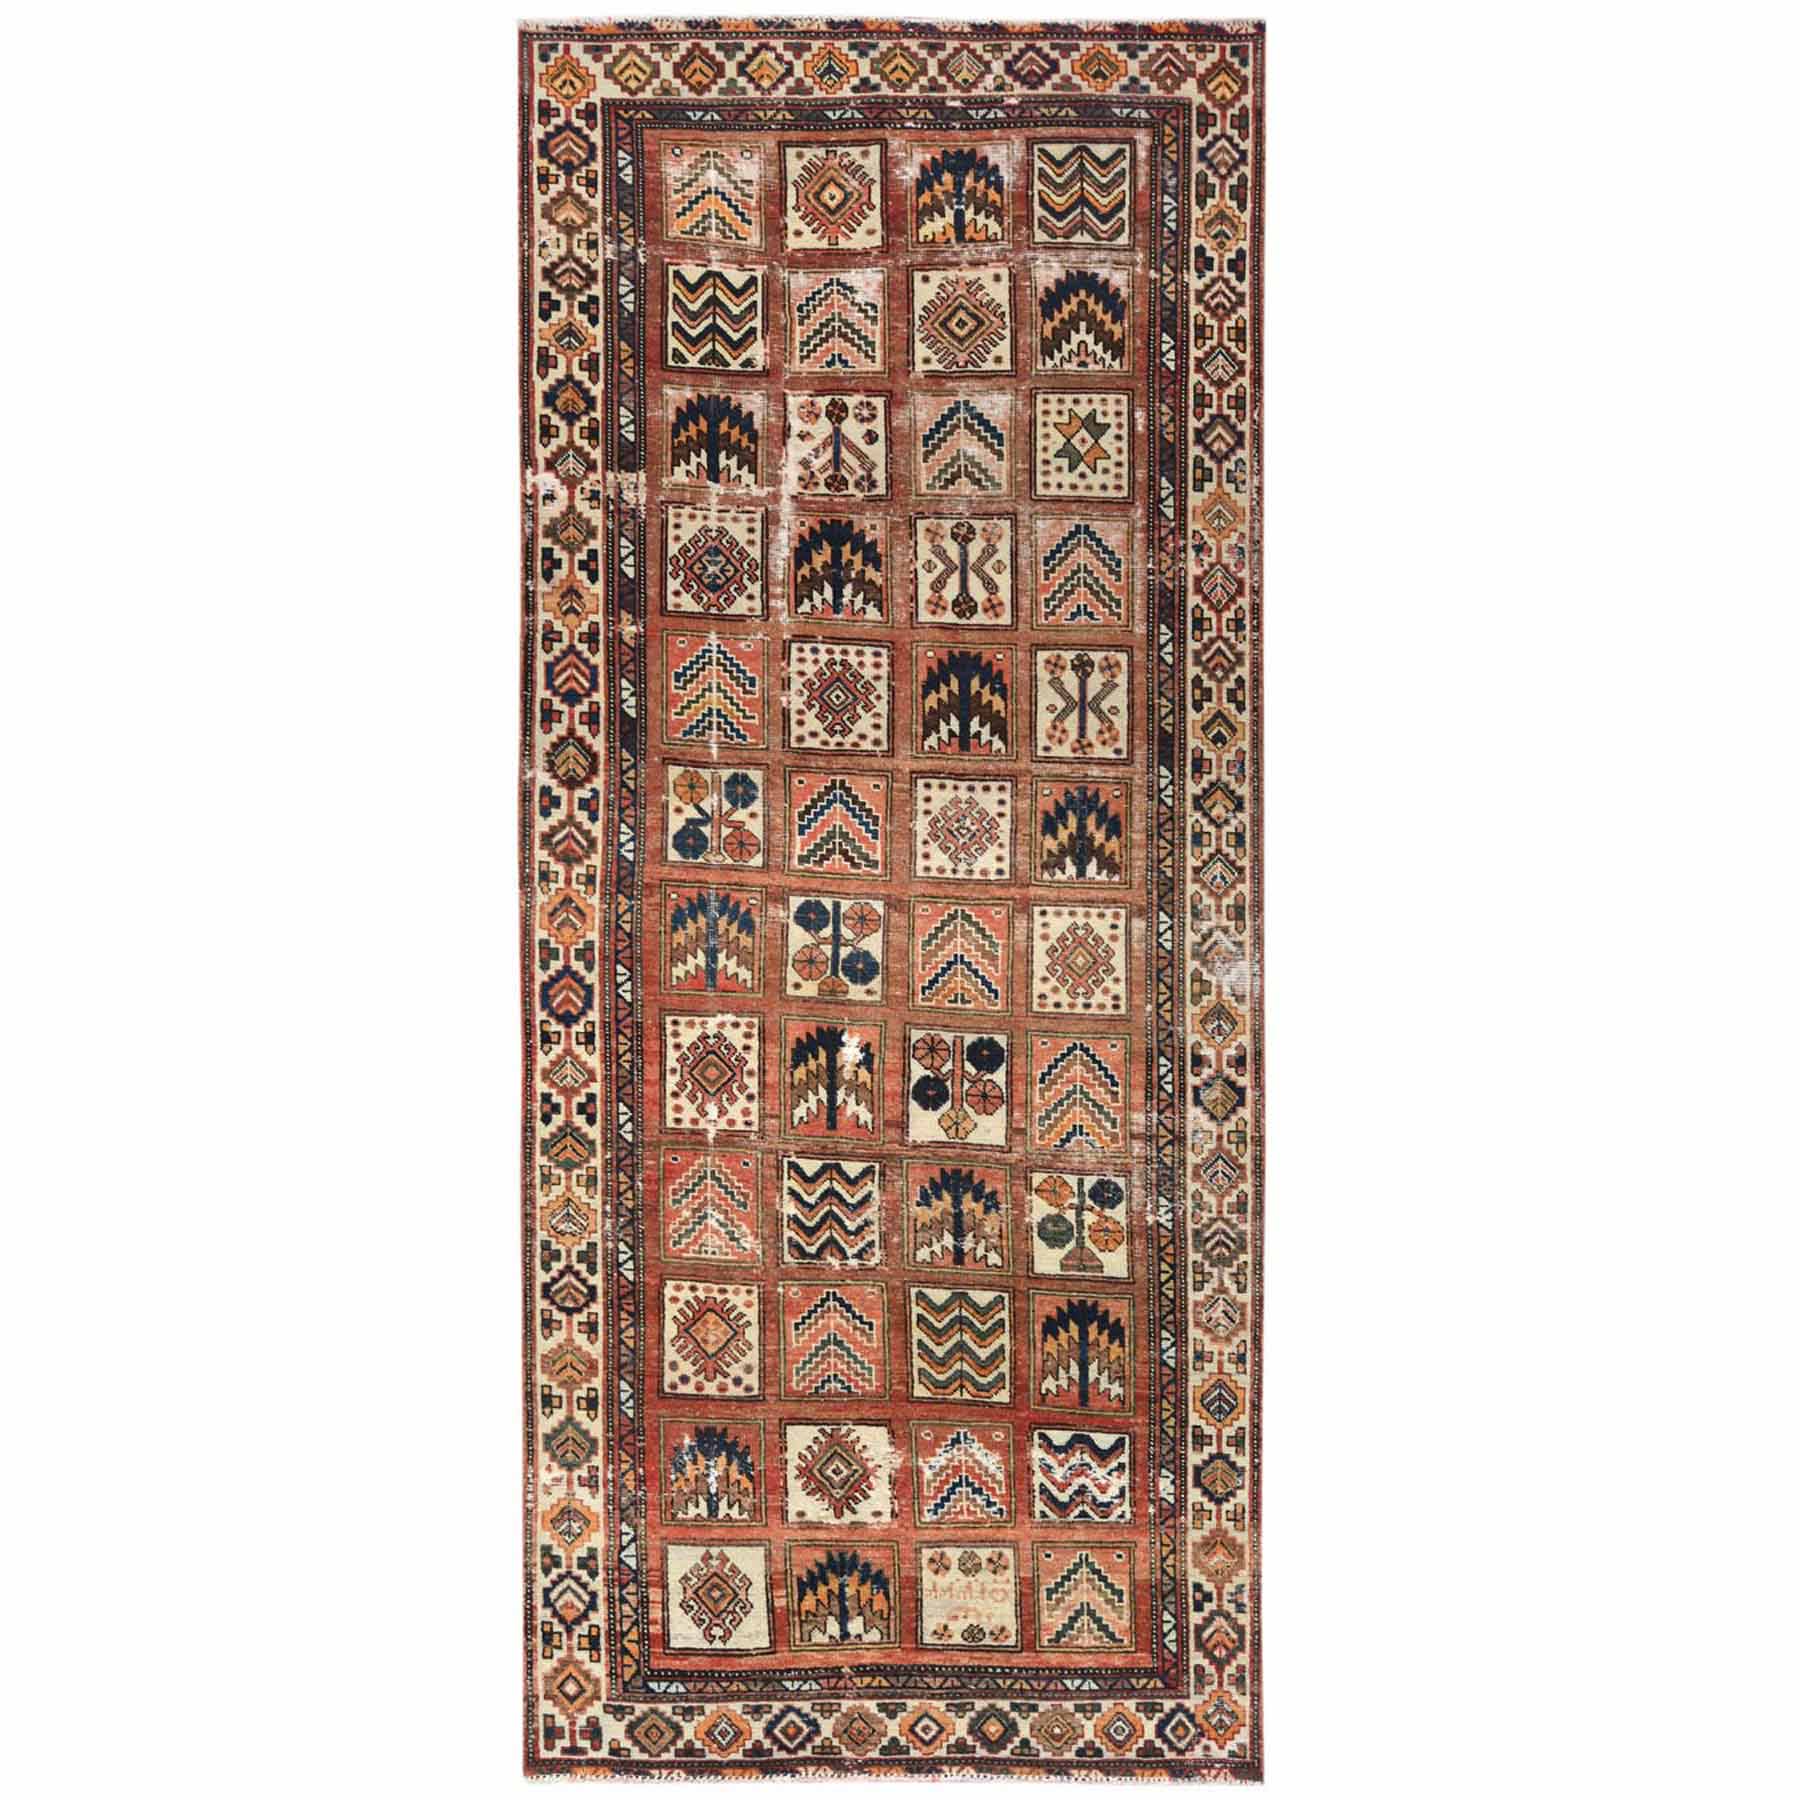 Overdyed-Vintage-Hand-Knotted-Rug-309590